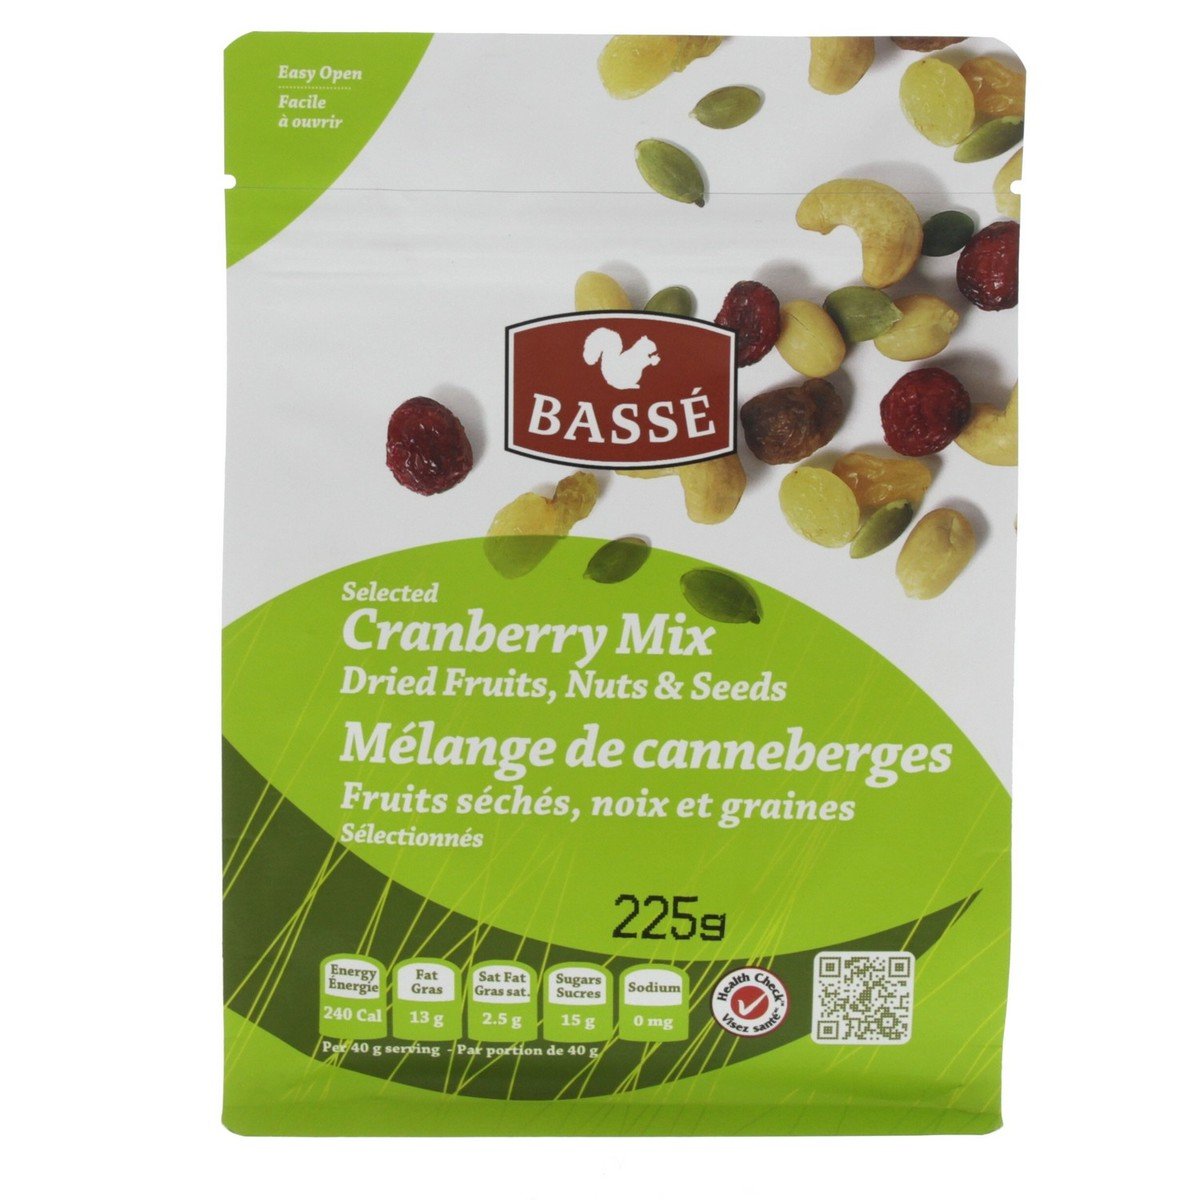 Basse Cranberry Mix Dried Fruits, Nuts And Seeds 225g